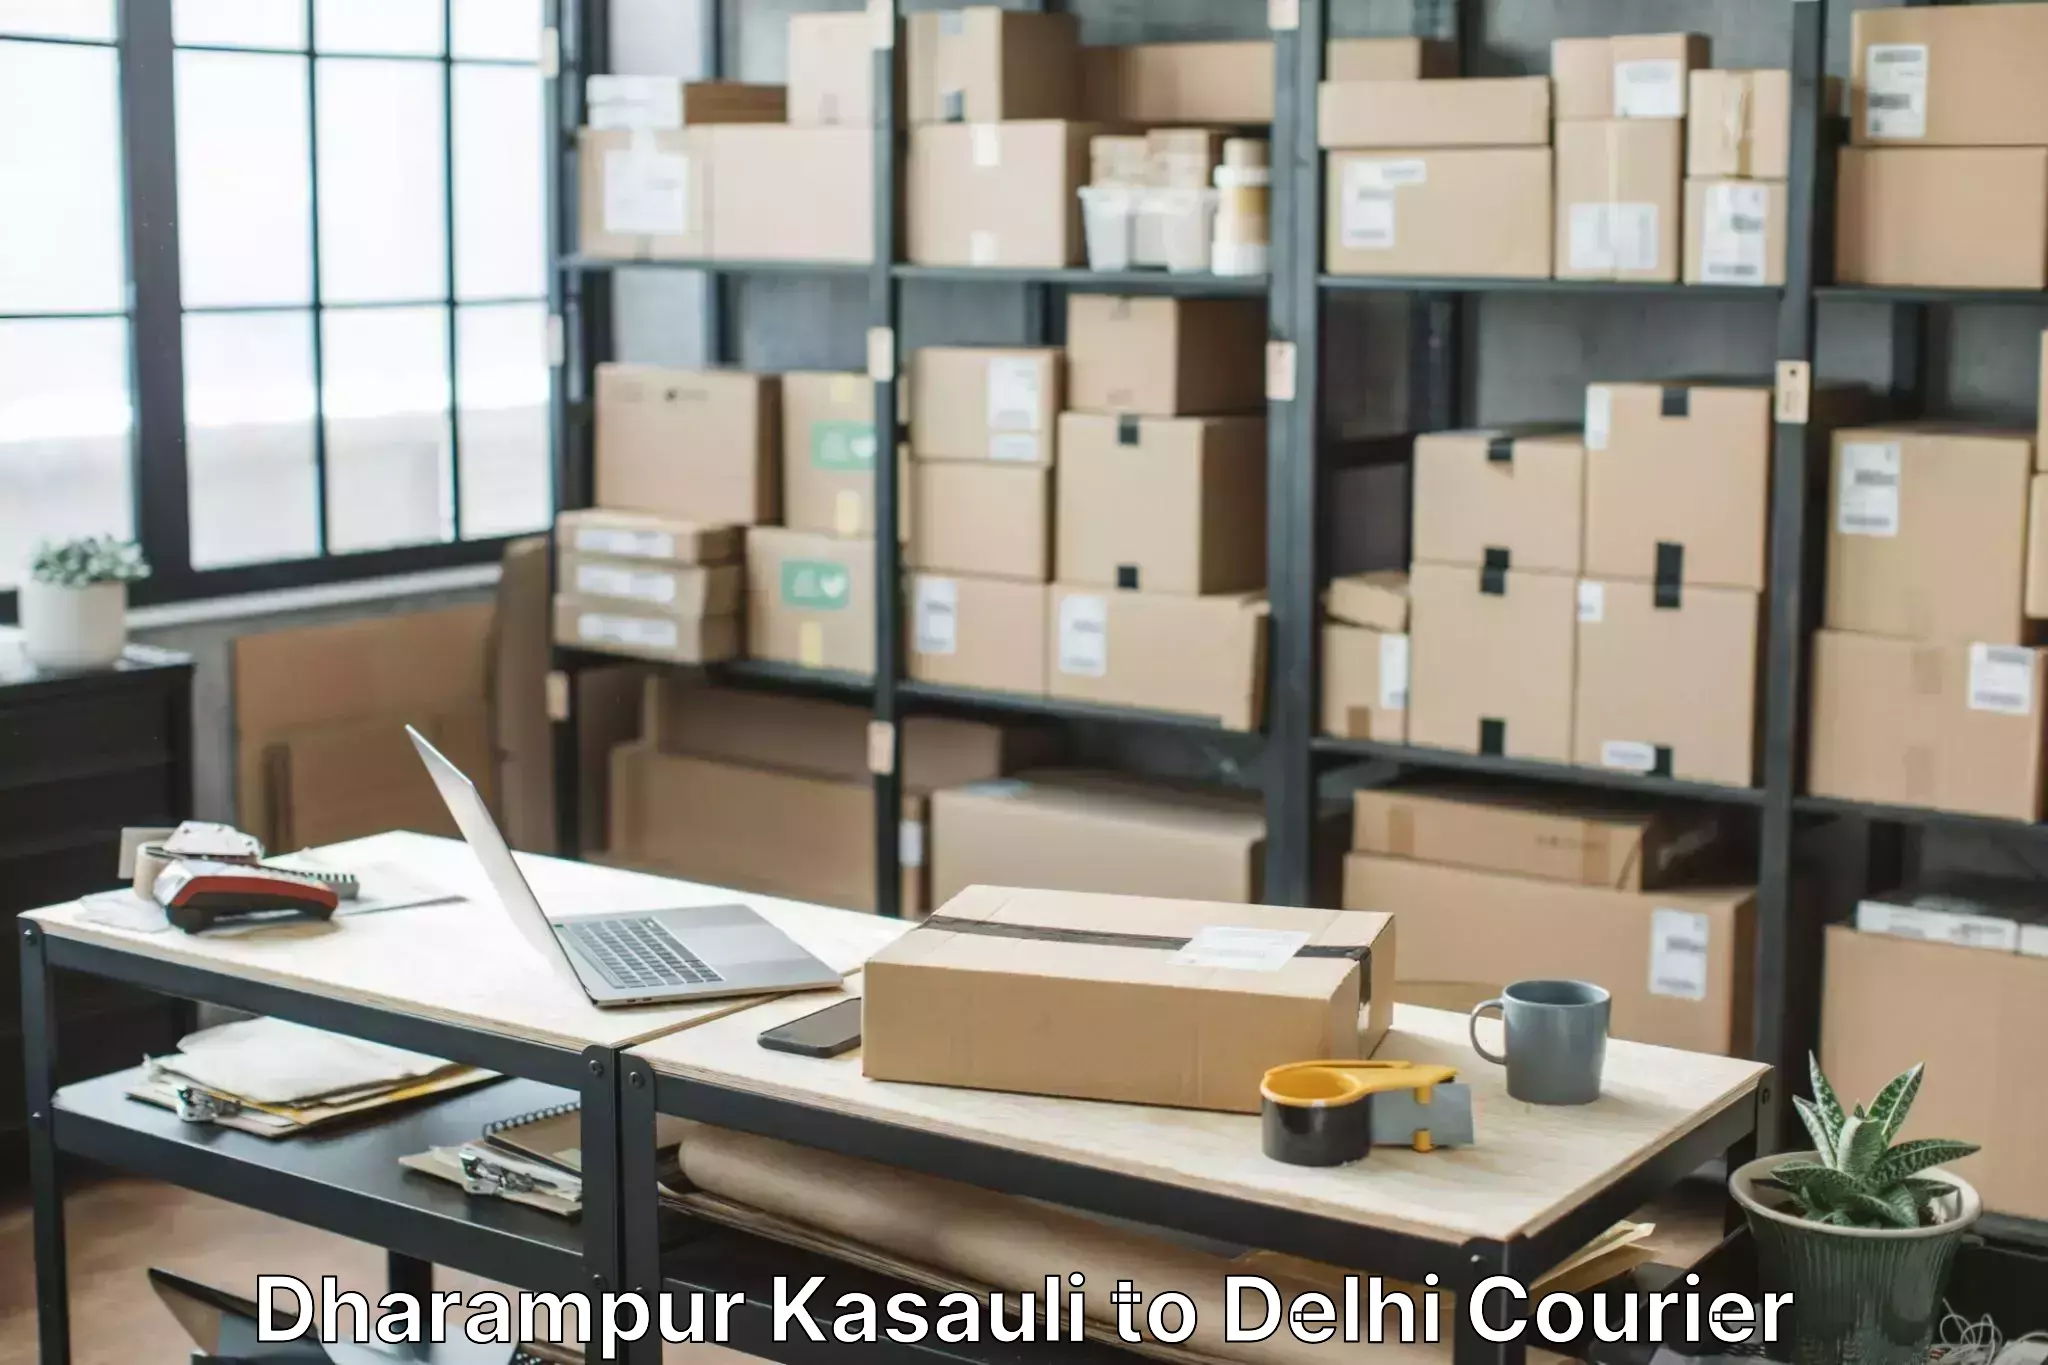 Household moving experts Dharampur Kasauli to Delhi